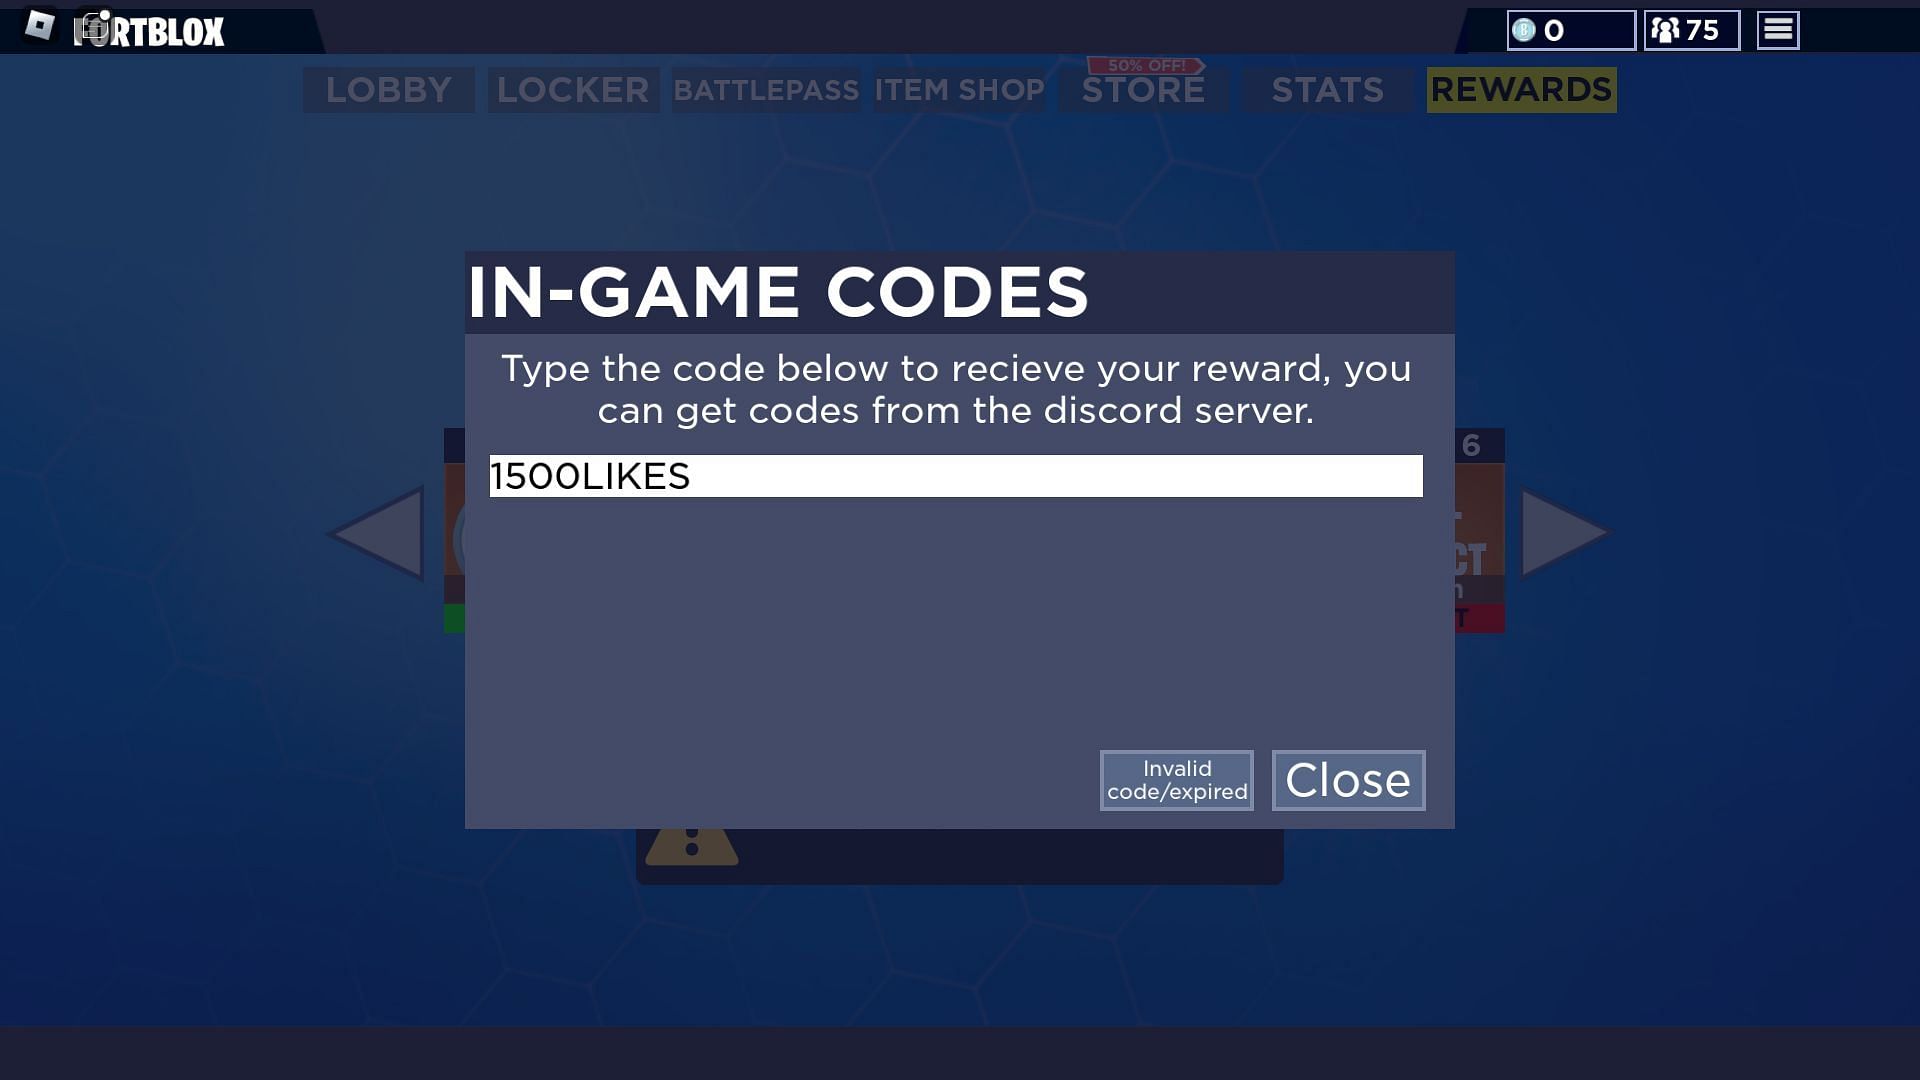 Troubleshooting codes for Fortblox (Image via Roblox)